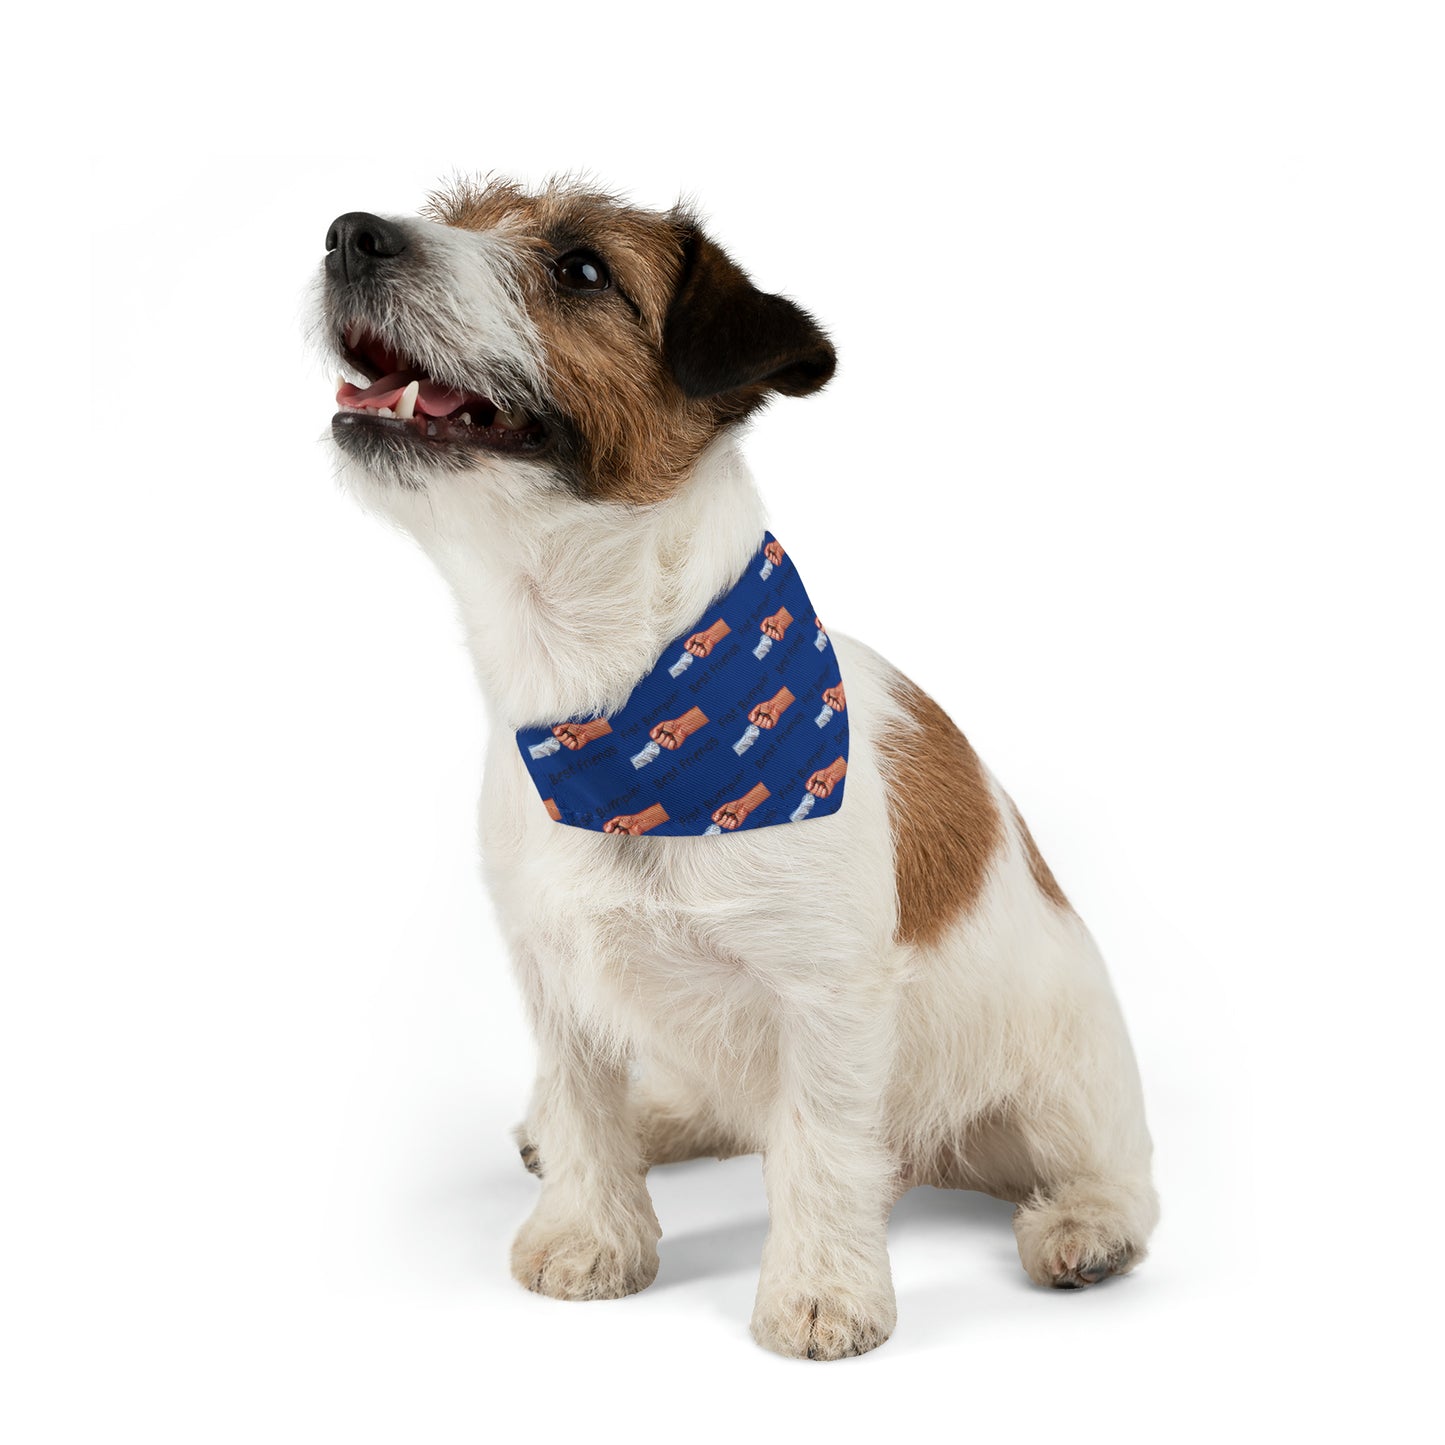 Fist Bumpin’ Best Friends Opie’s Cavalier King Charles Spaniel Pet Bandana Collar Blue with Black lettering.